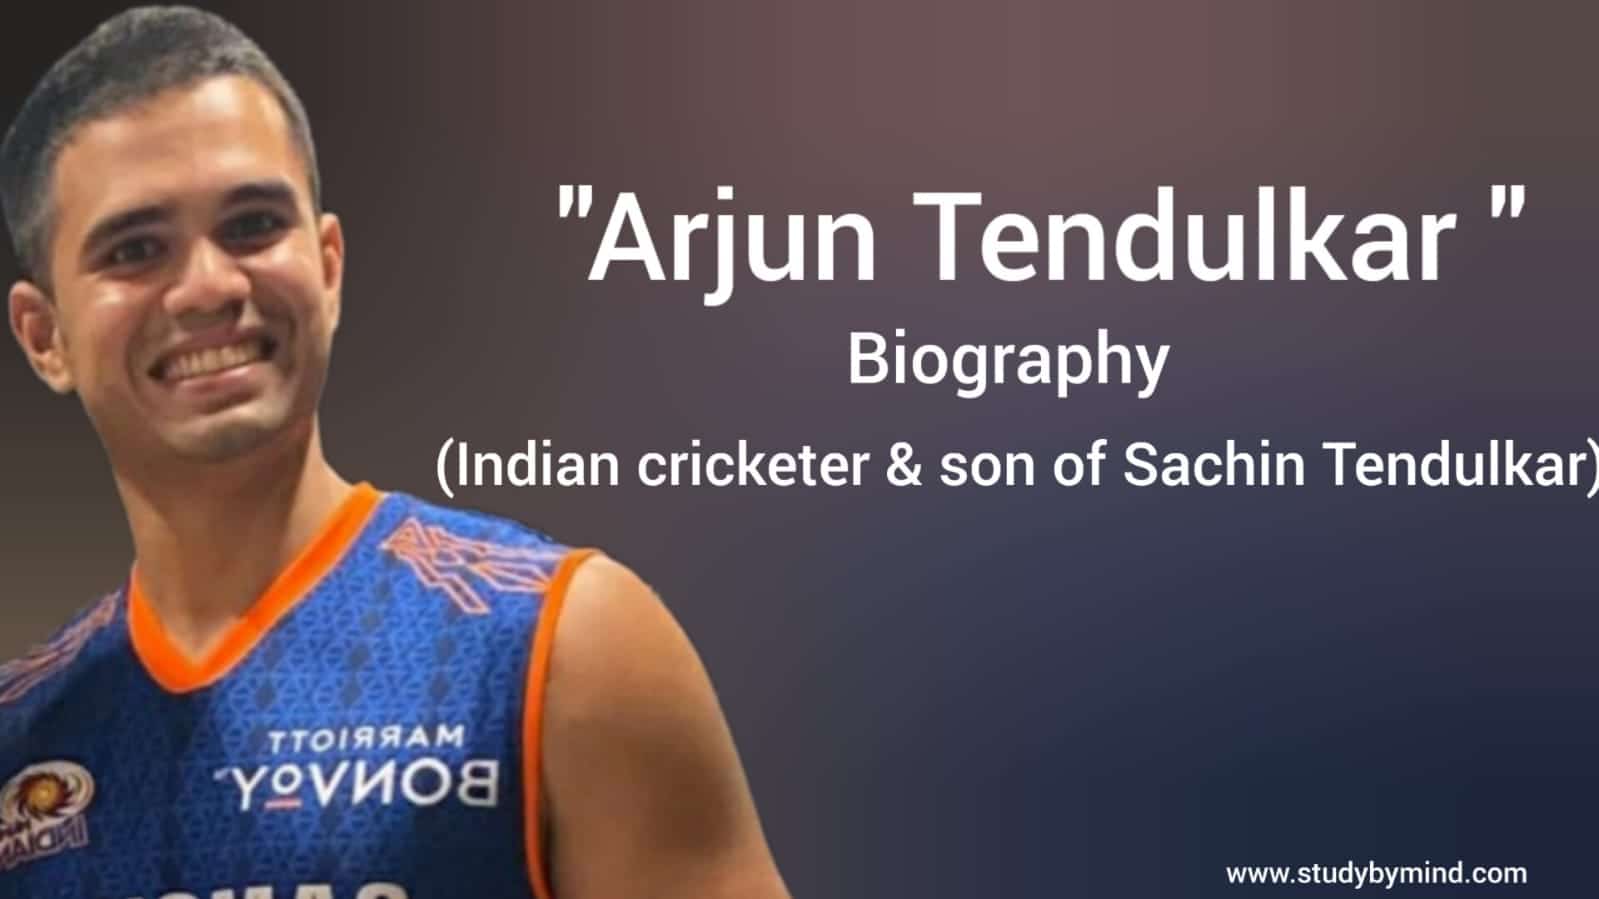 You are currently viewing Arjun Tendulkar biography in english (Indian cricketer)